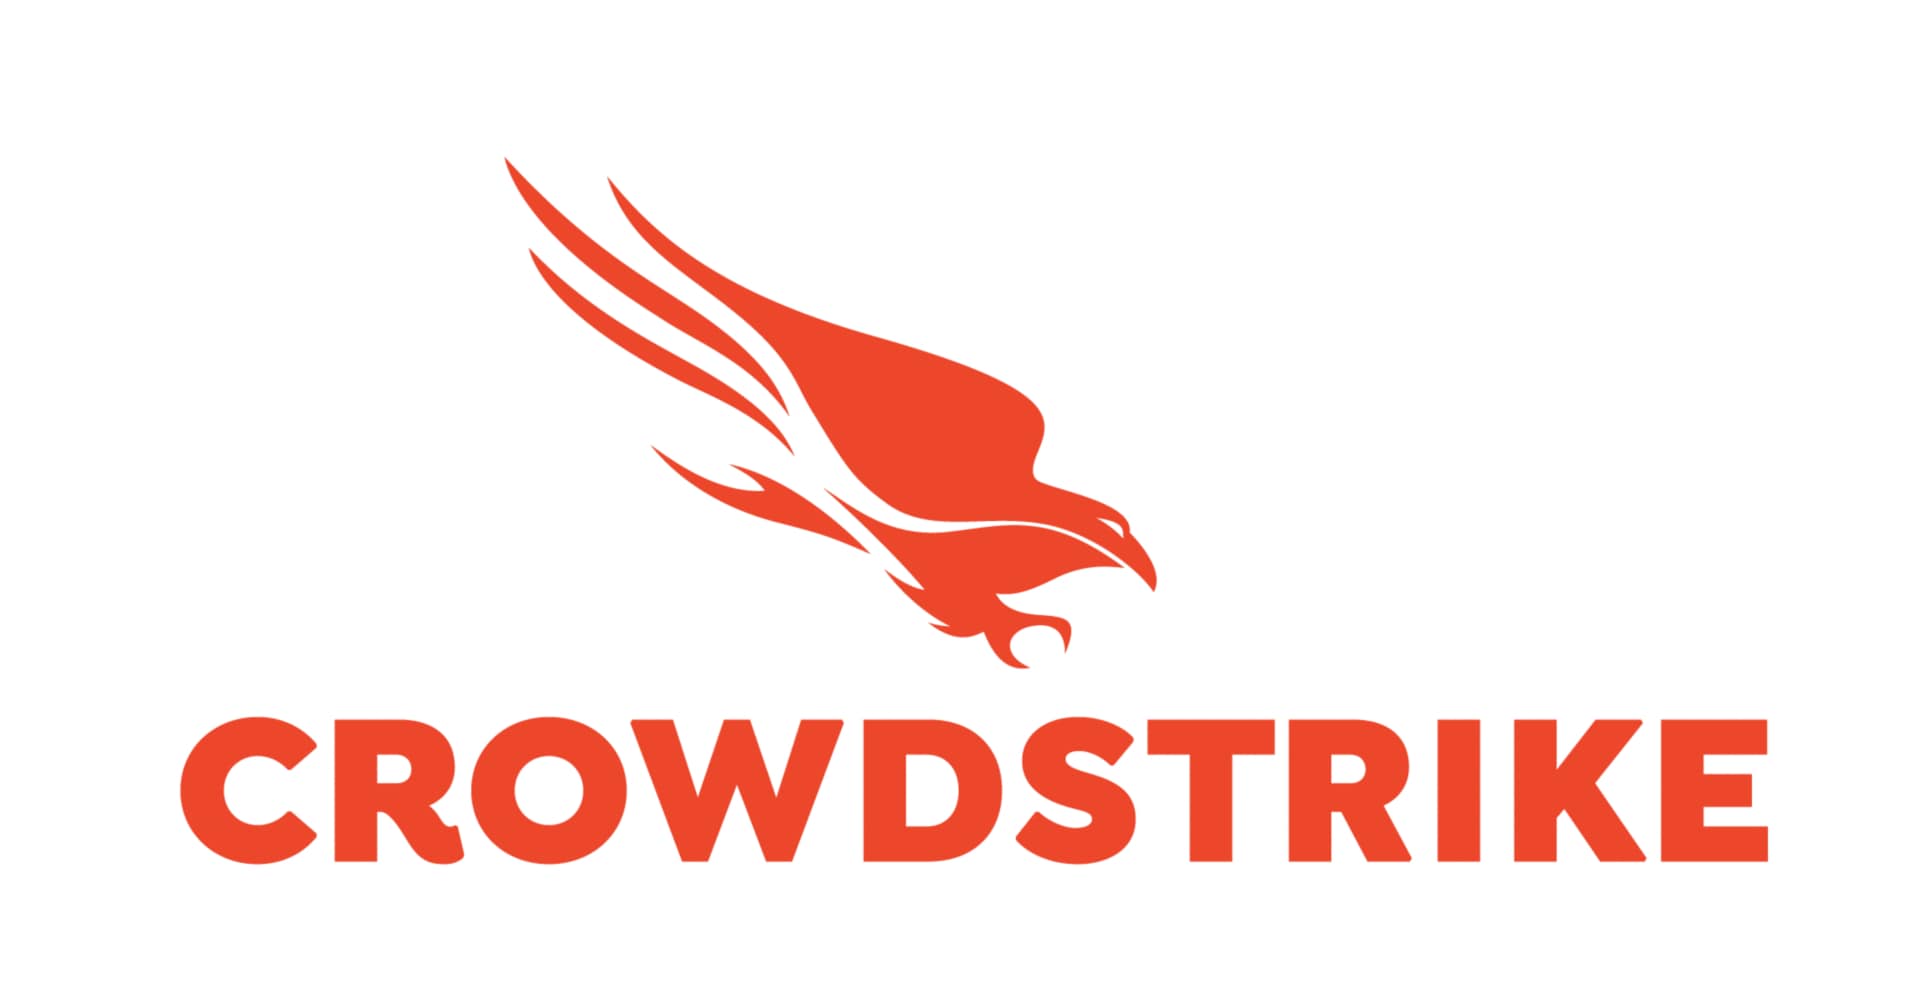 CrowdStrike 4-Month Falcon Intelligence Application Software Subscription (2,000-2,499 Licenses)